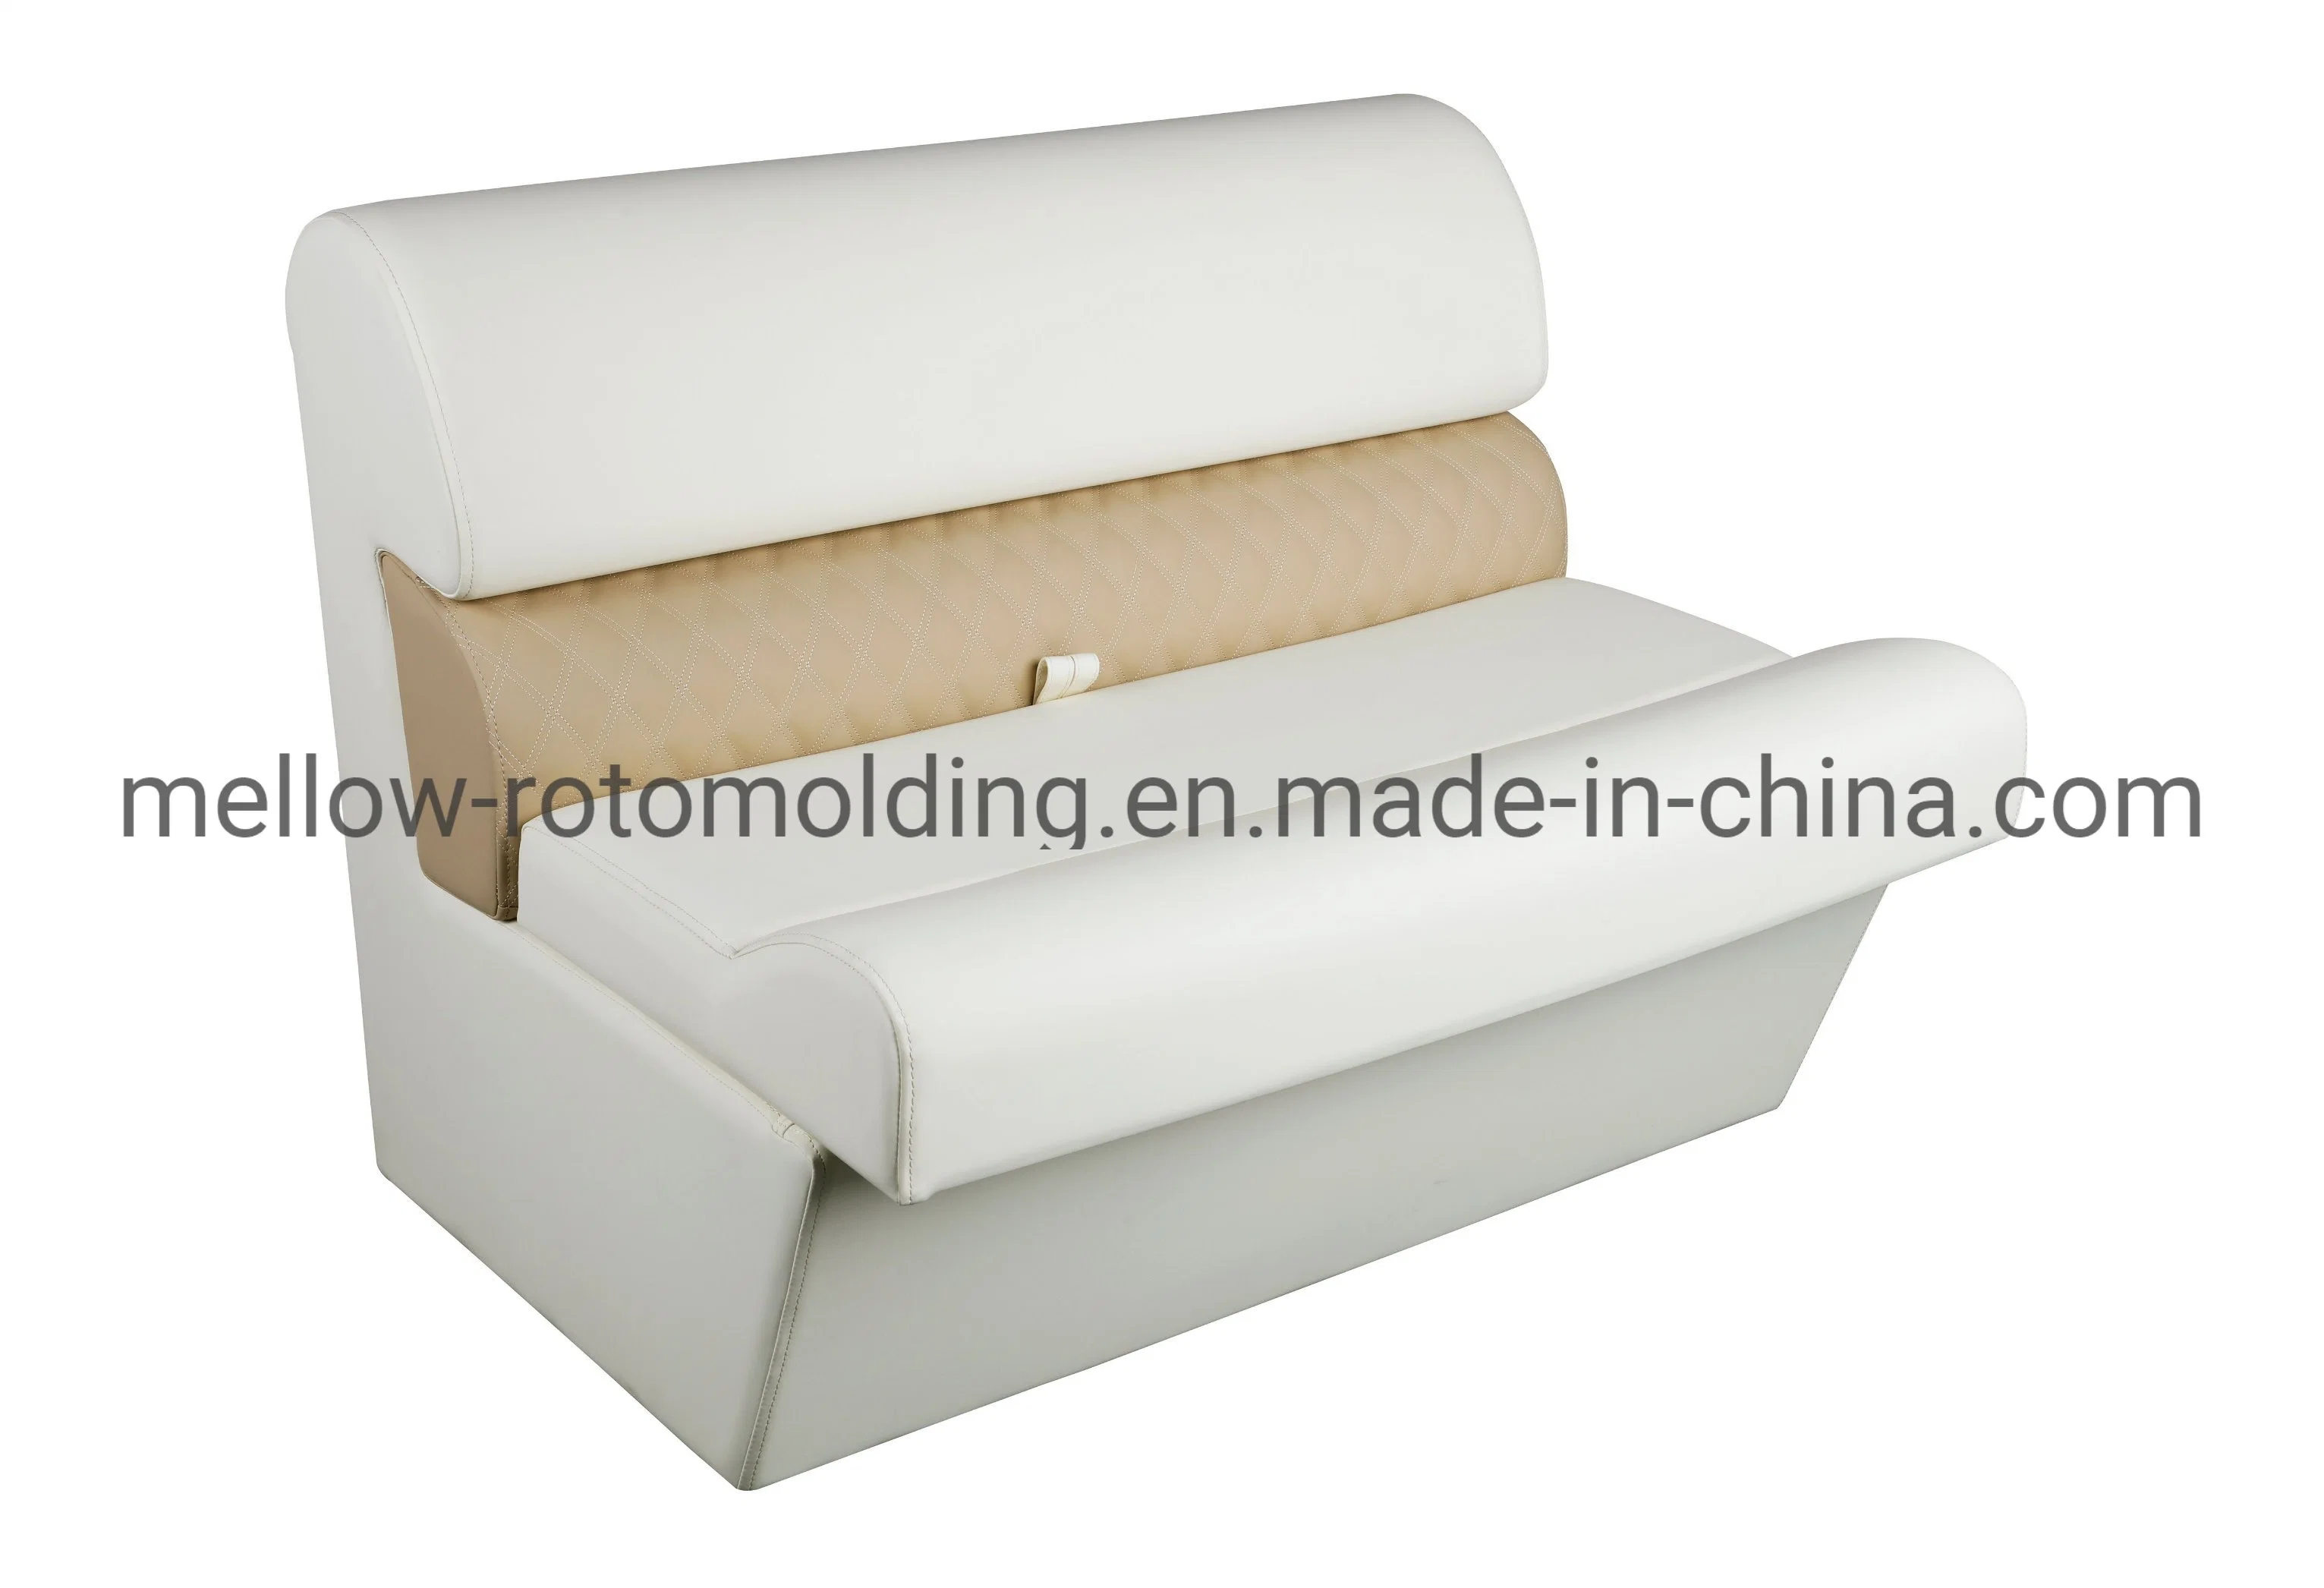 Luxury Pontoon Boat Seats Marine Parts Boat Accessories for Sale